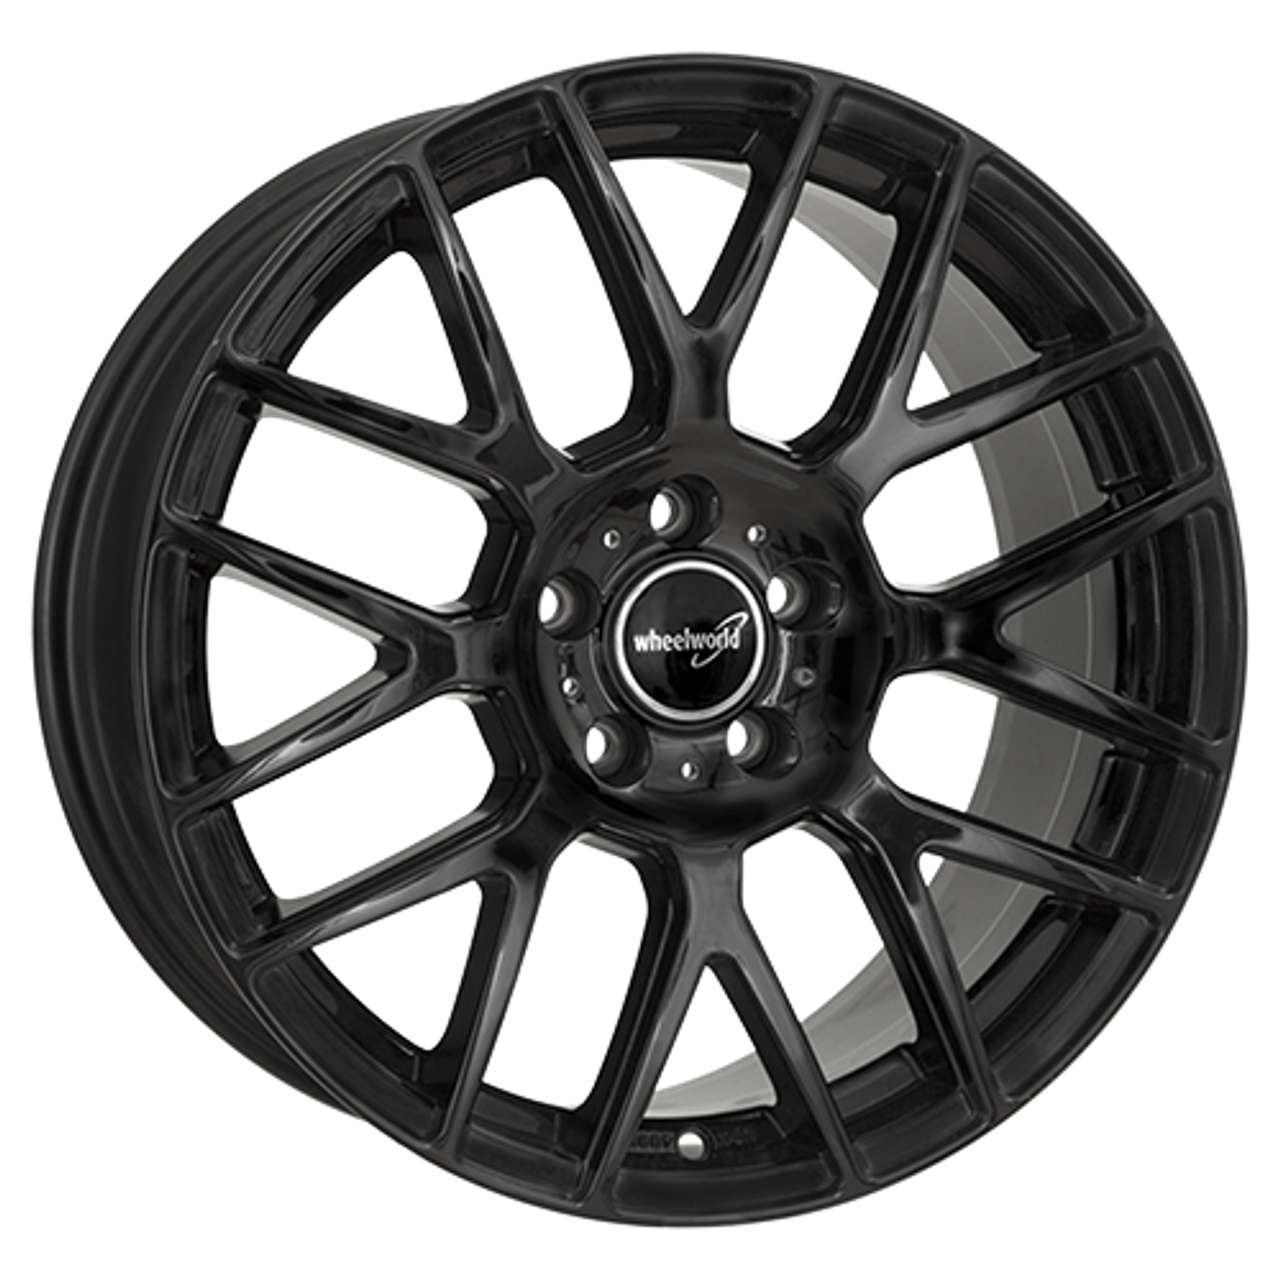 WHEELWORLD-2DRV WH26 black glossy painted 10.0Jx22 5x130 ET50